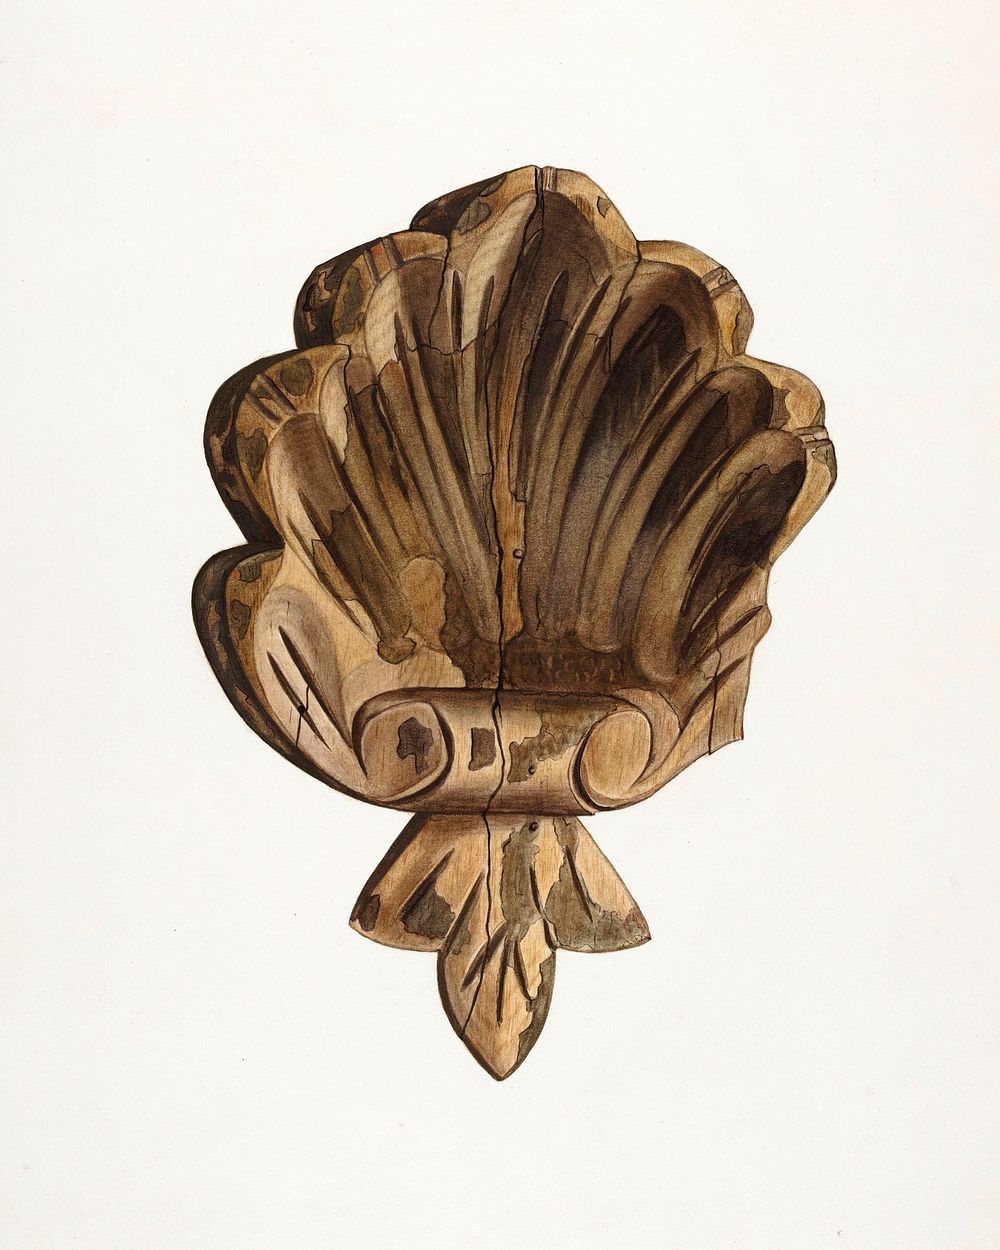 Wood Carving - Shell (ca.1939) by Clayton Clements. Original from The National Gallery of Art. Digitally enhanced by…